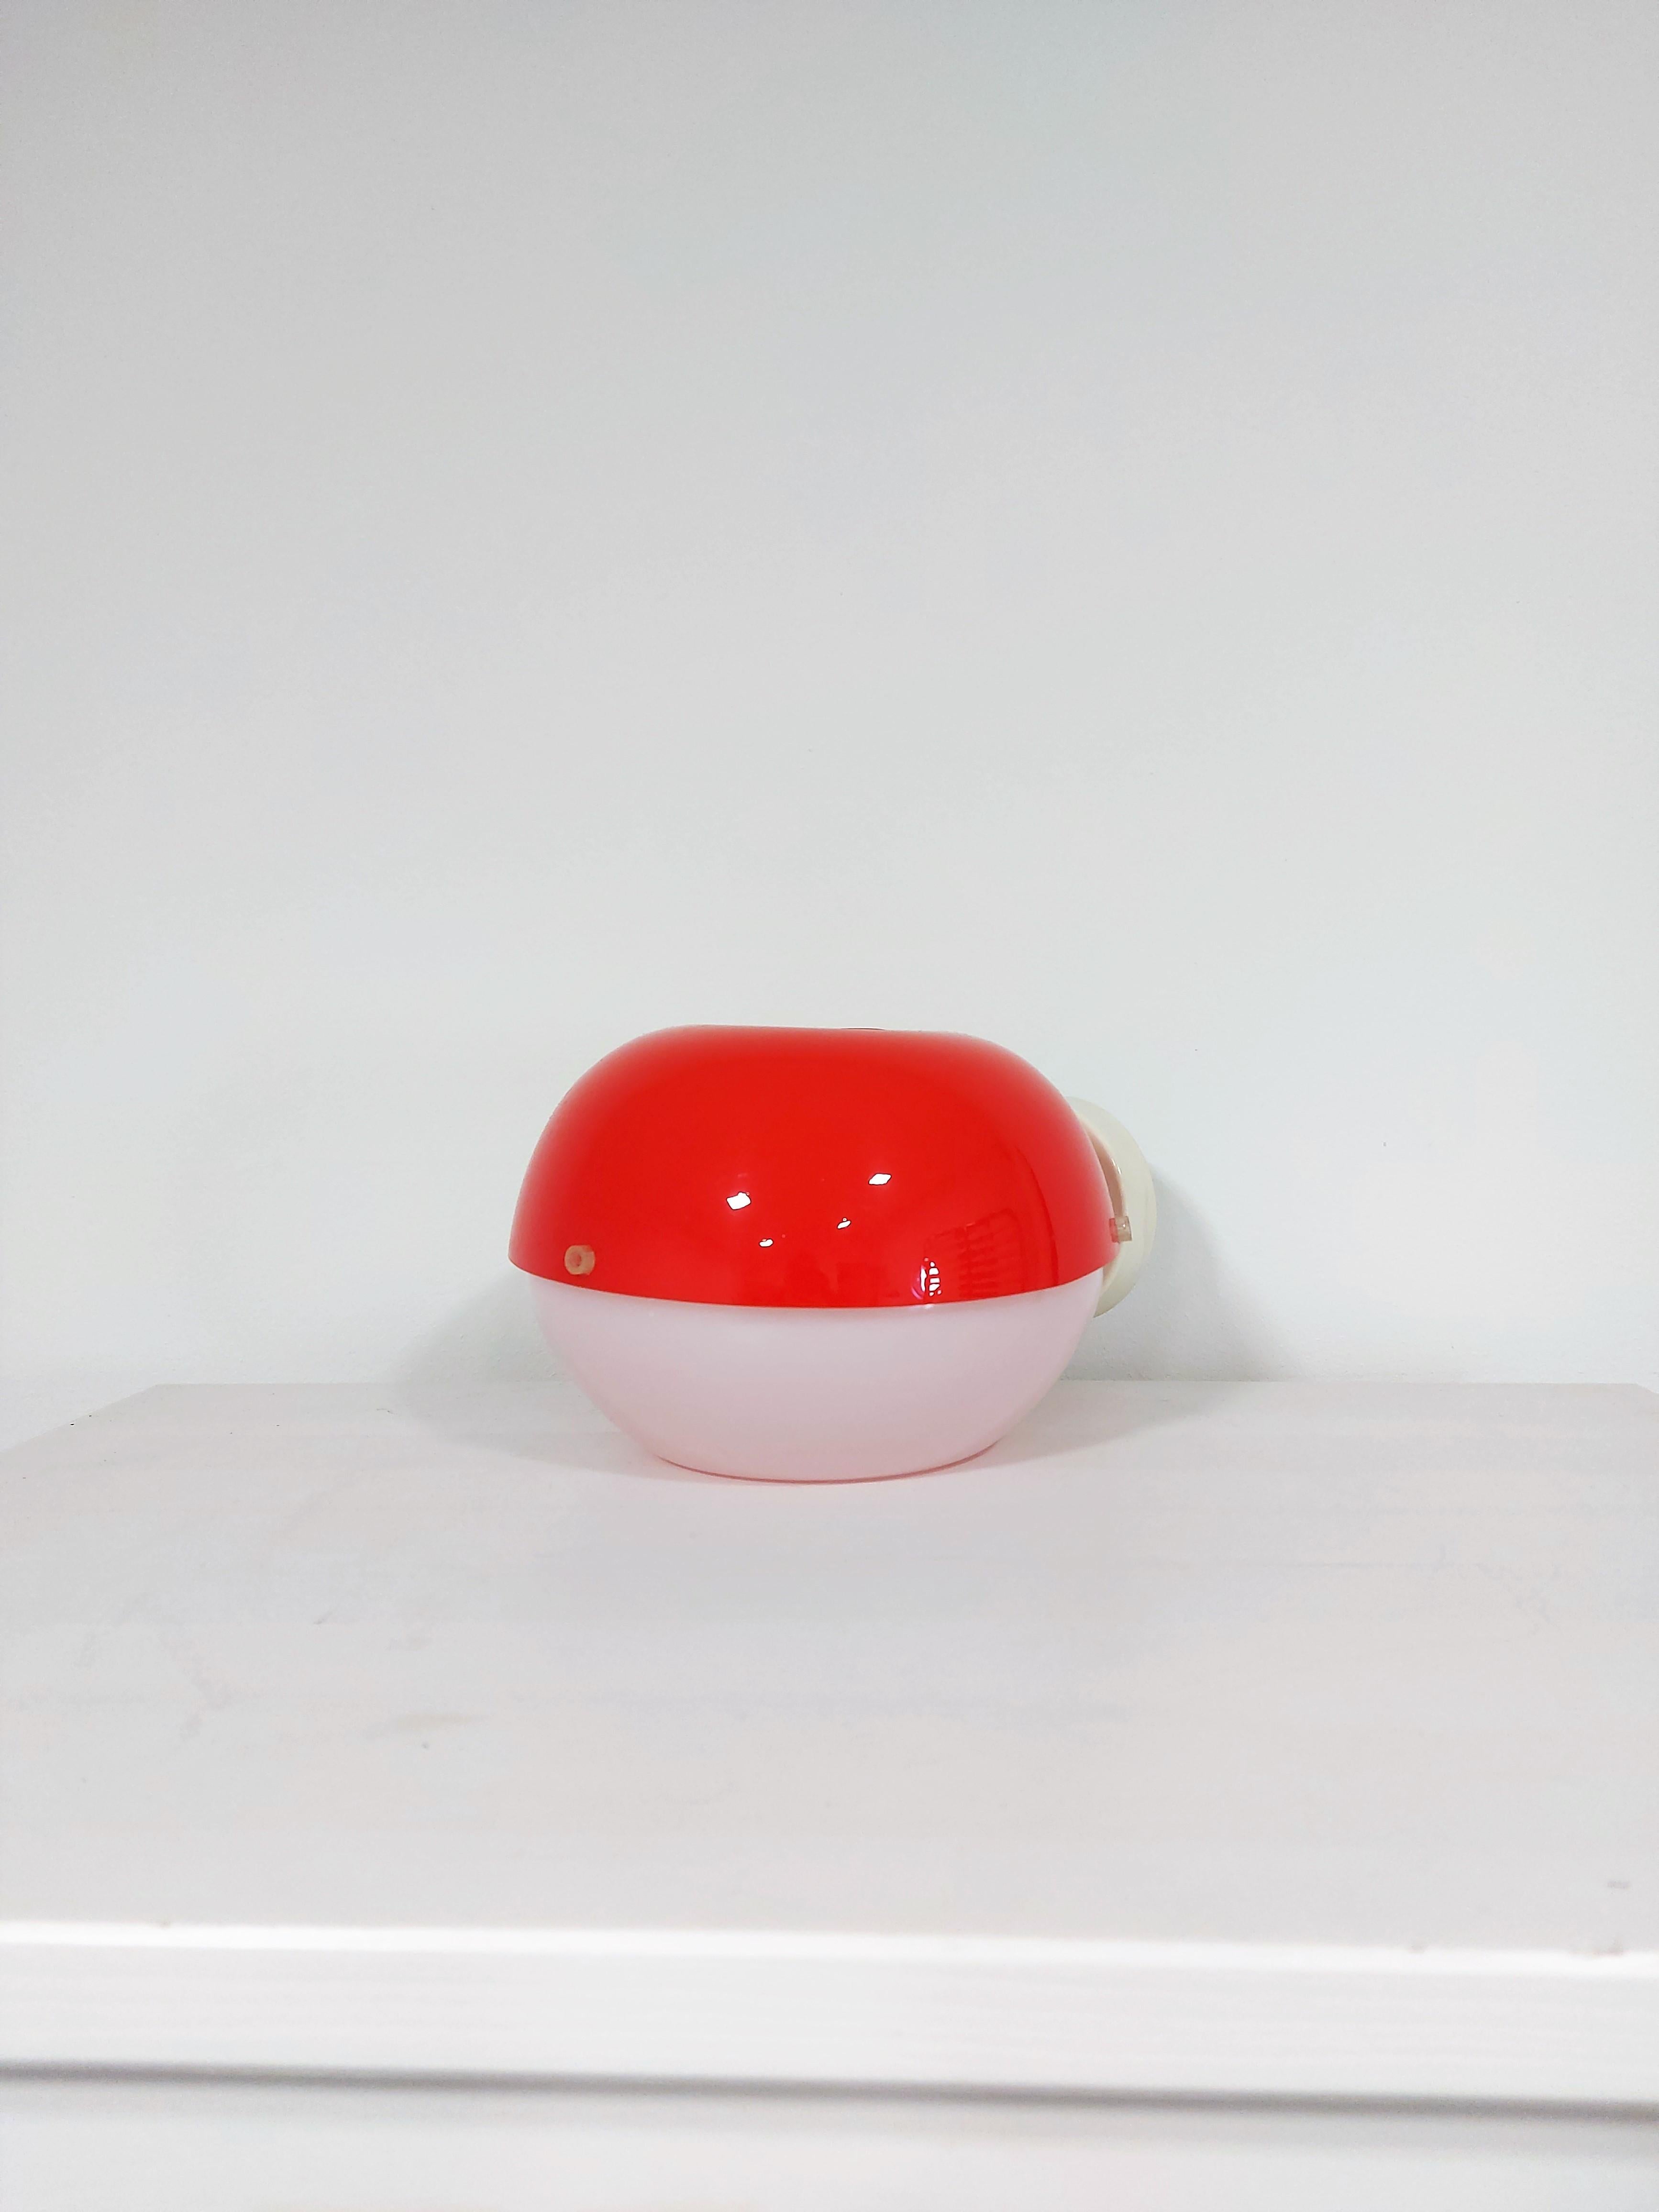 Vintage wall lamp

Colour: Red/white

Material: Plastic/metal

Period: 1980s

Style: Midcentury.